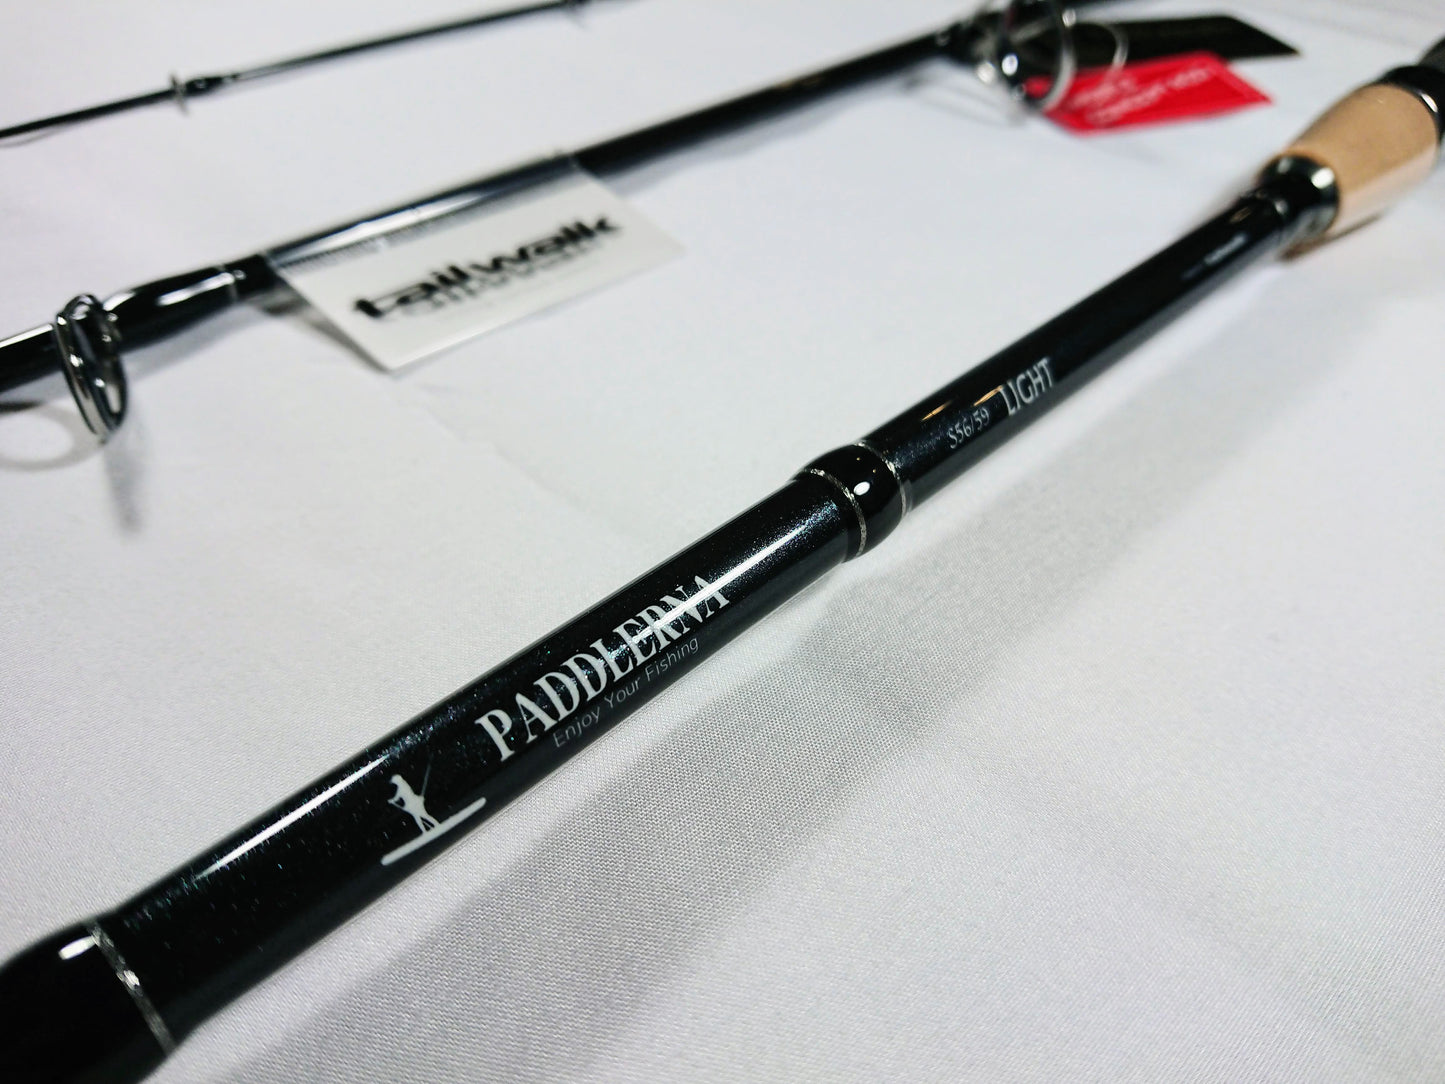 Zoom in view of Tailwalk Paddlerna LIght Kayak Fishign Rod to the spec and logo